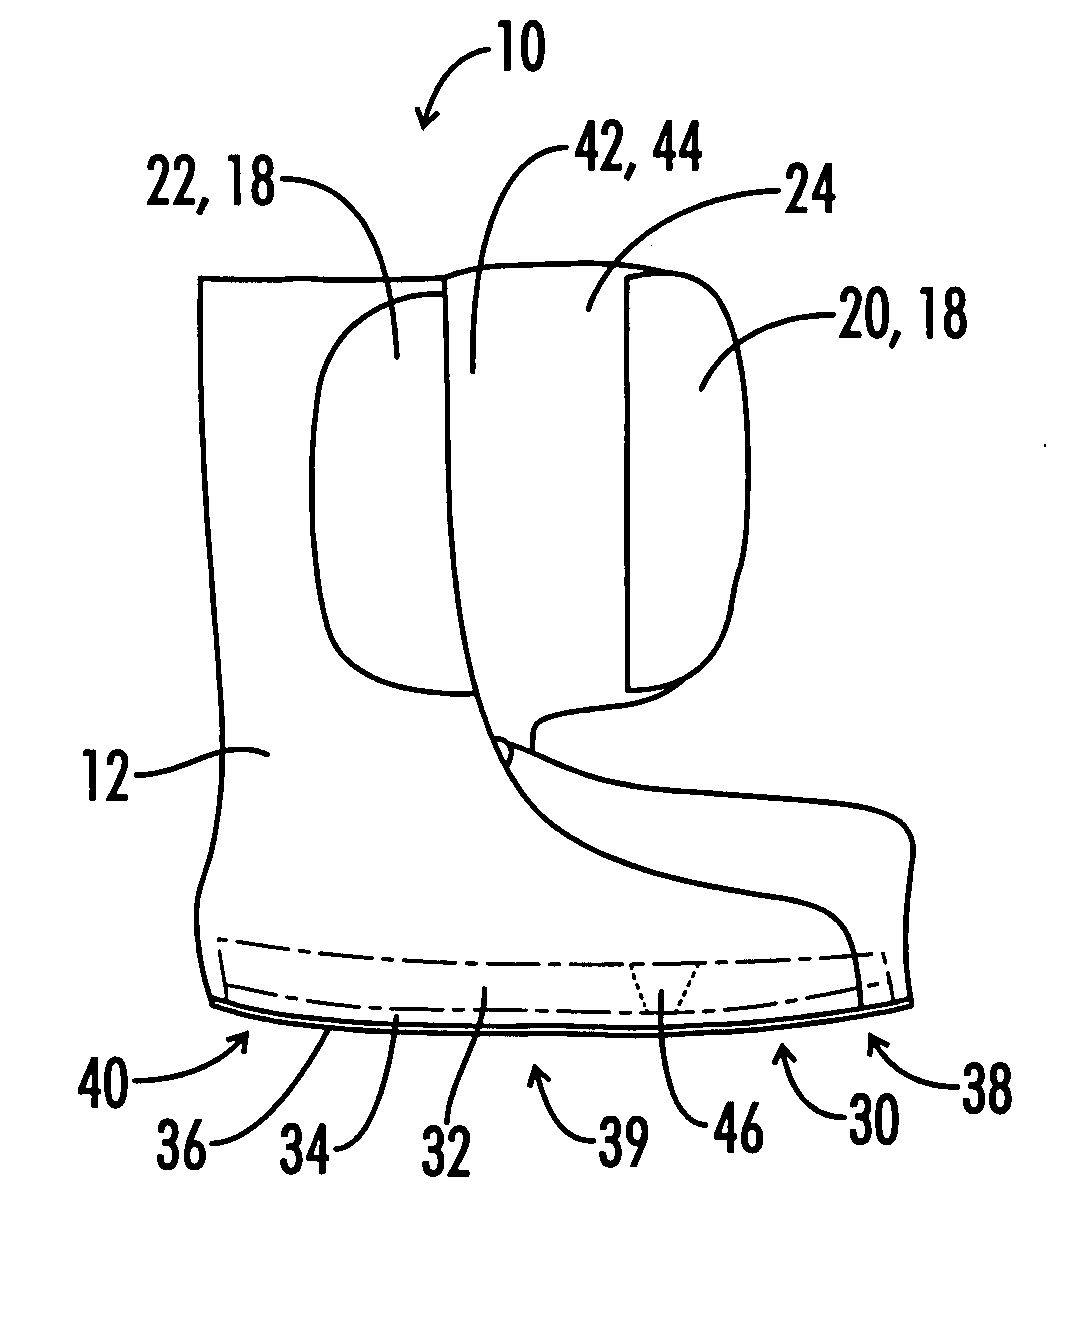 Boot for Ulcer Treatment